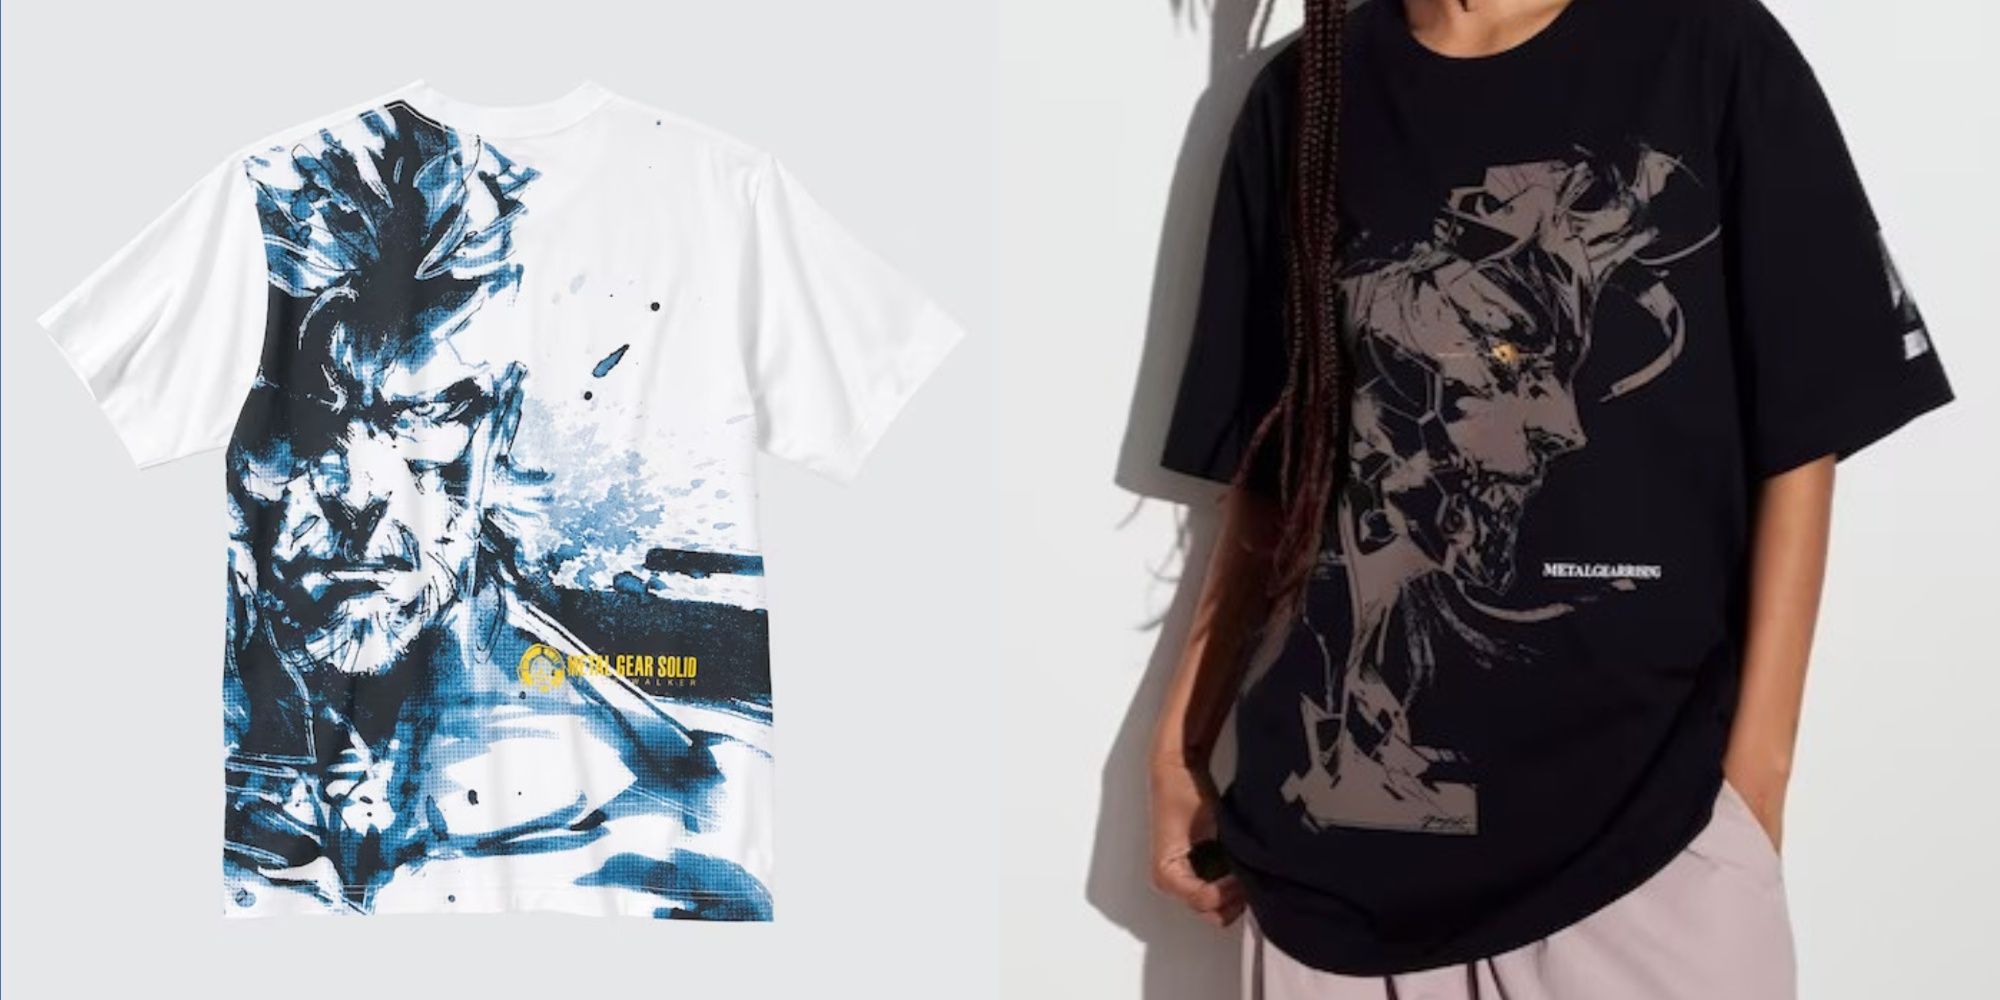 metal gear solid and metal gear rising t-shirts